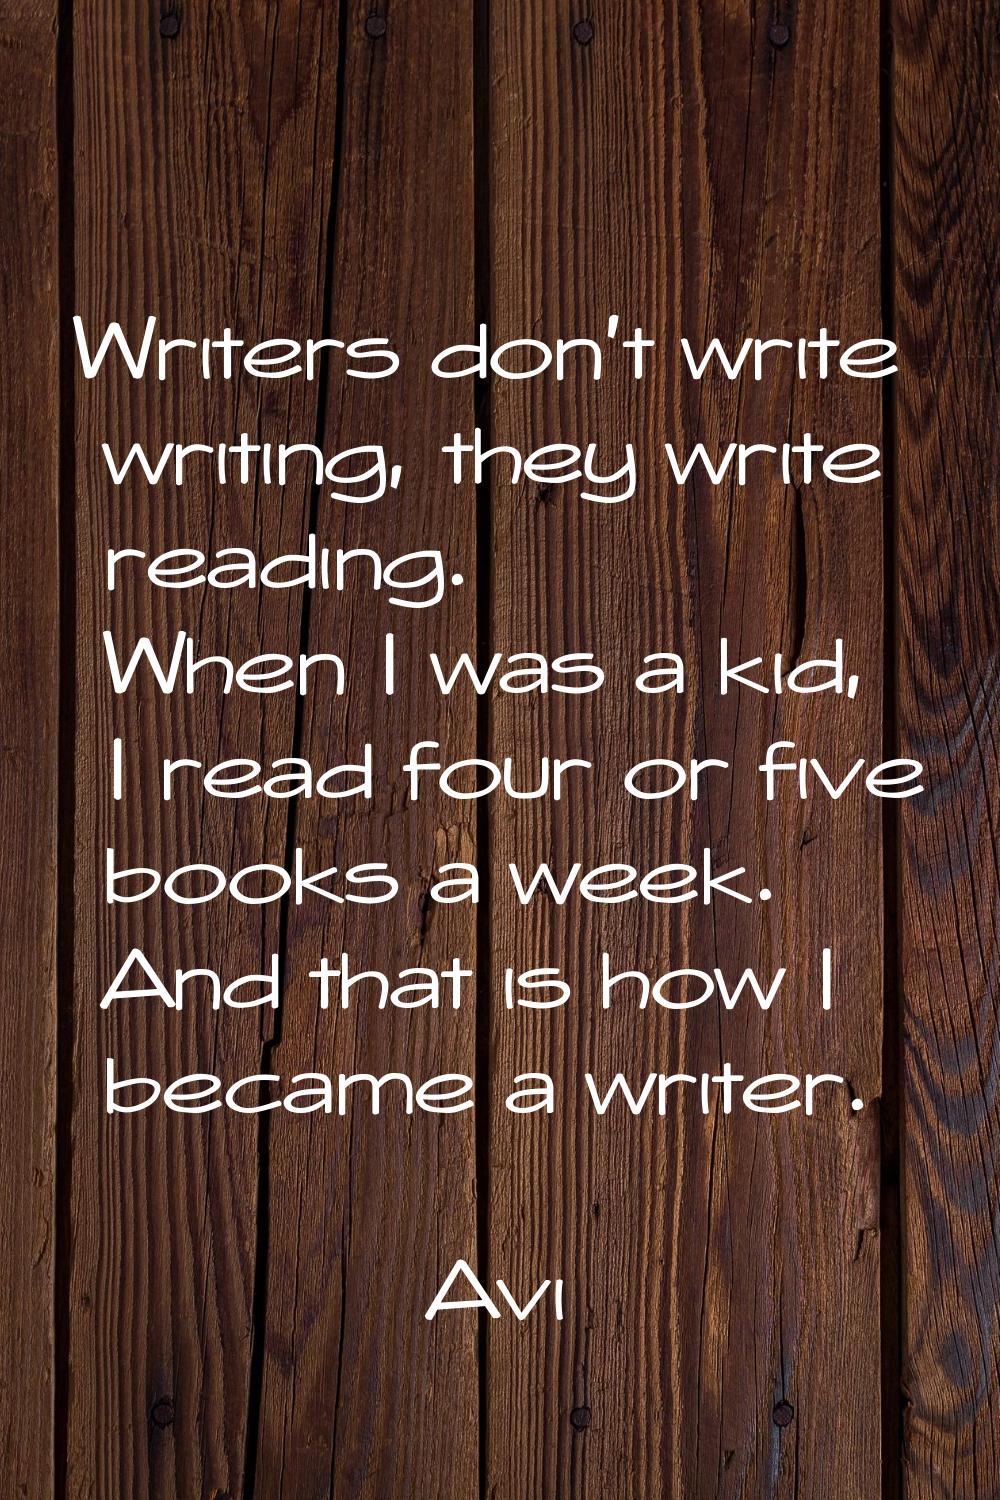 Writers don't write writing, they write reading. When I was a kid, I read four or five books a week